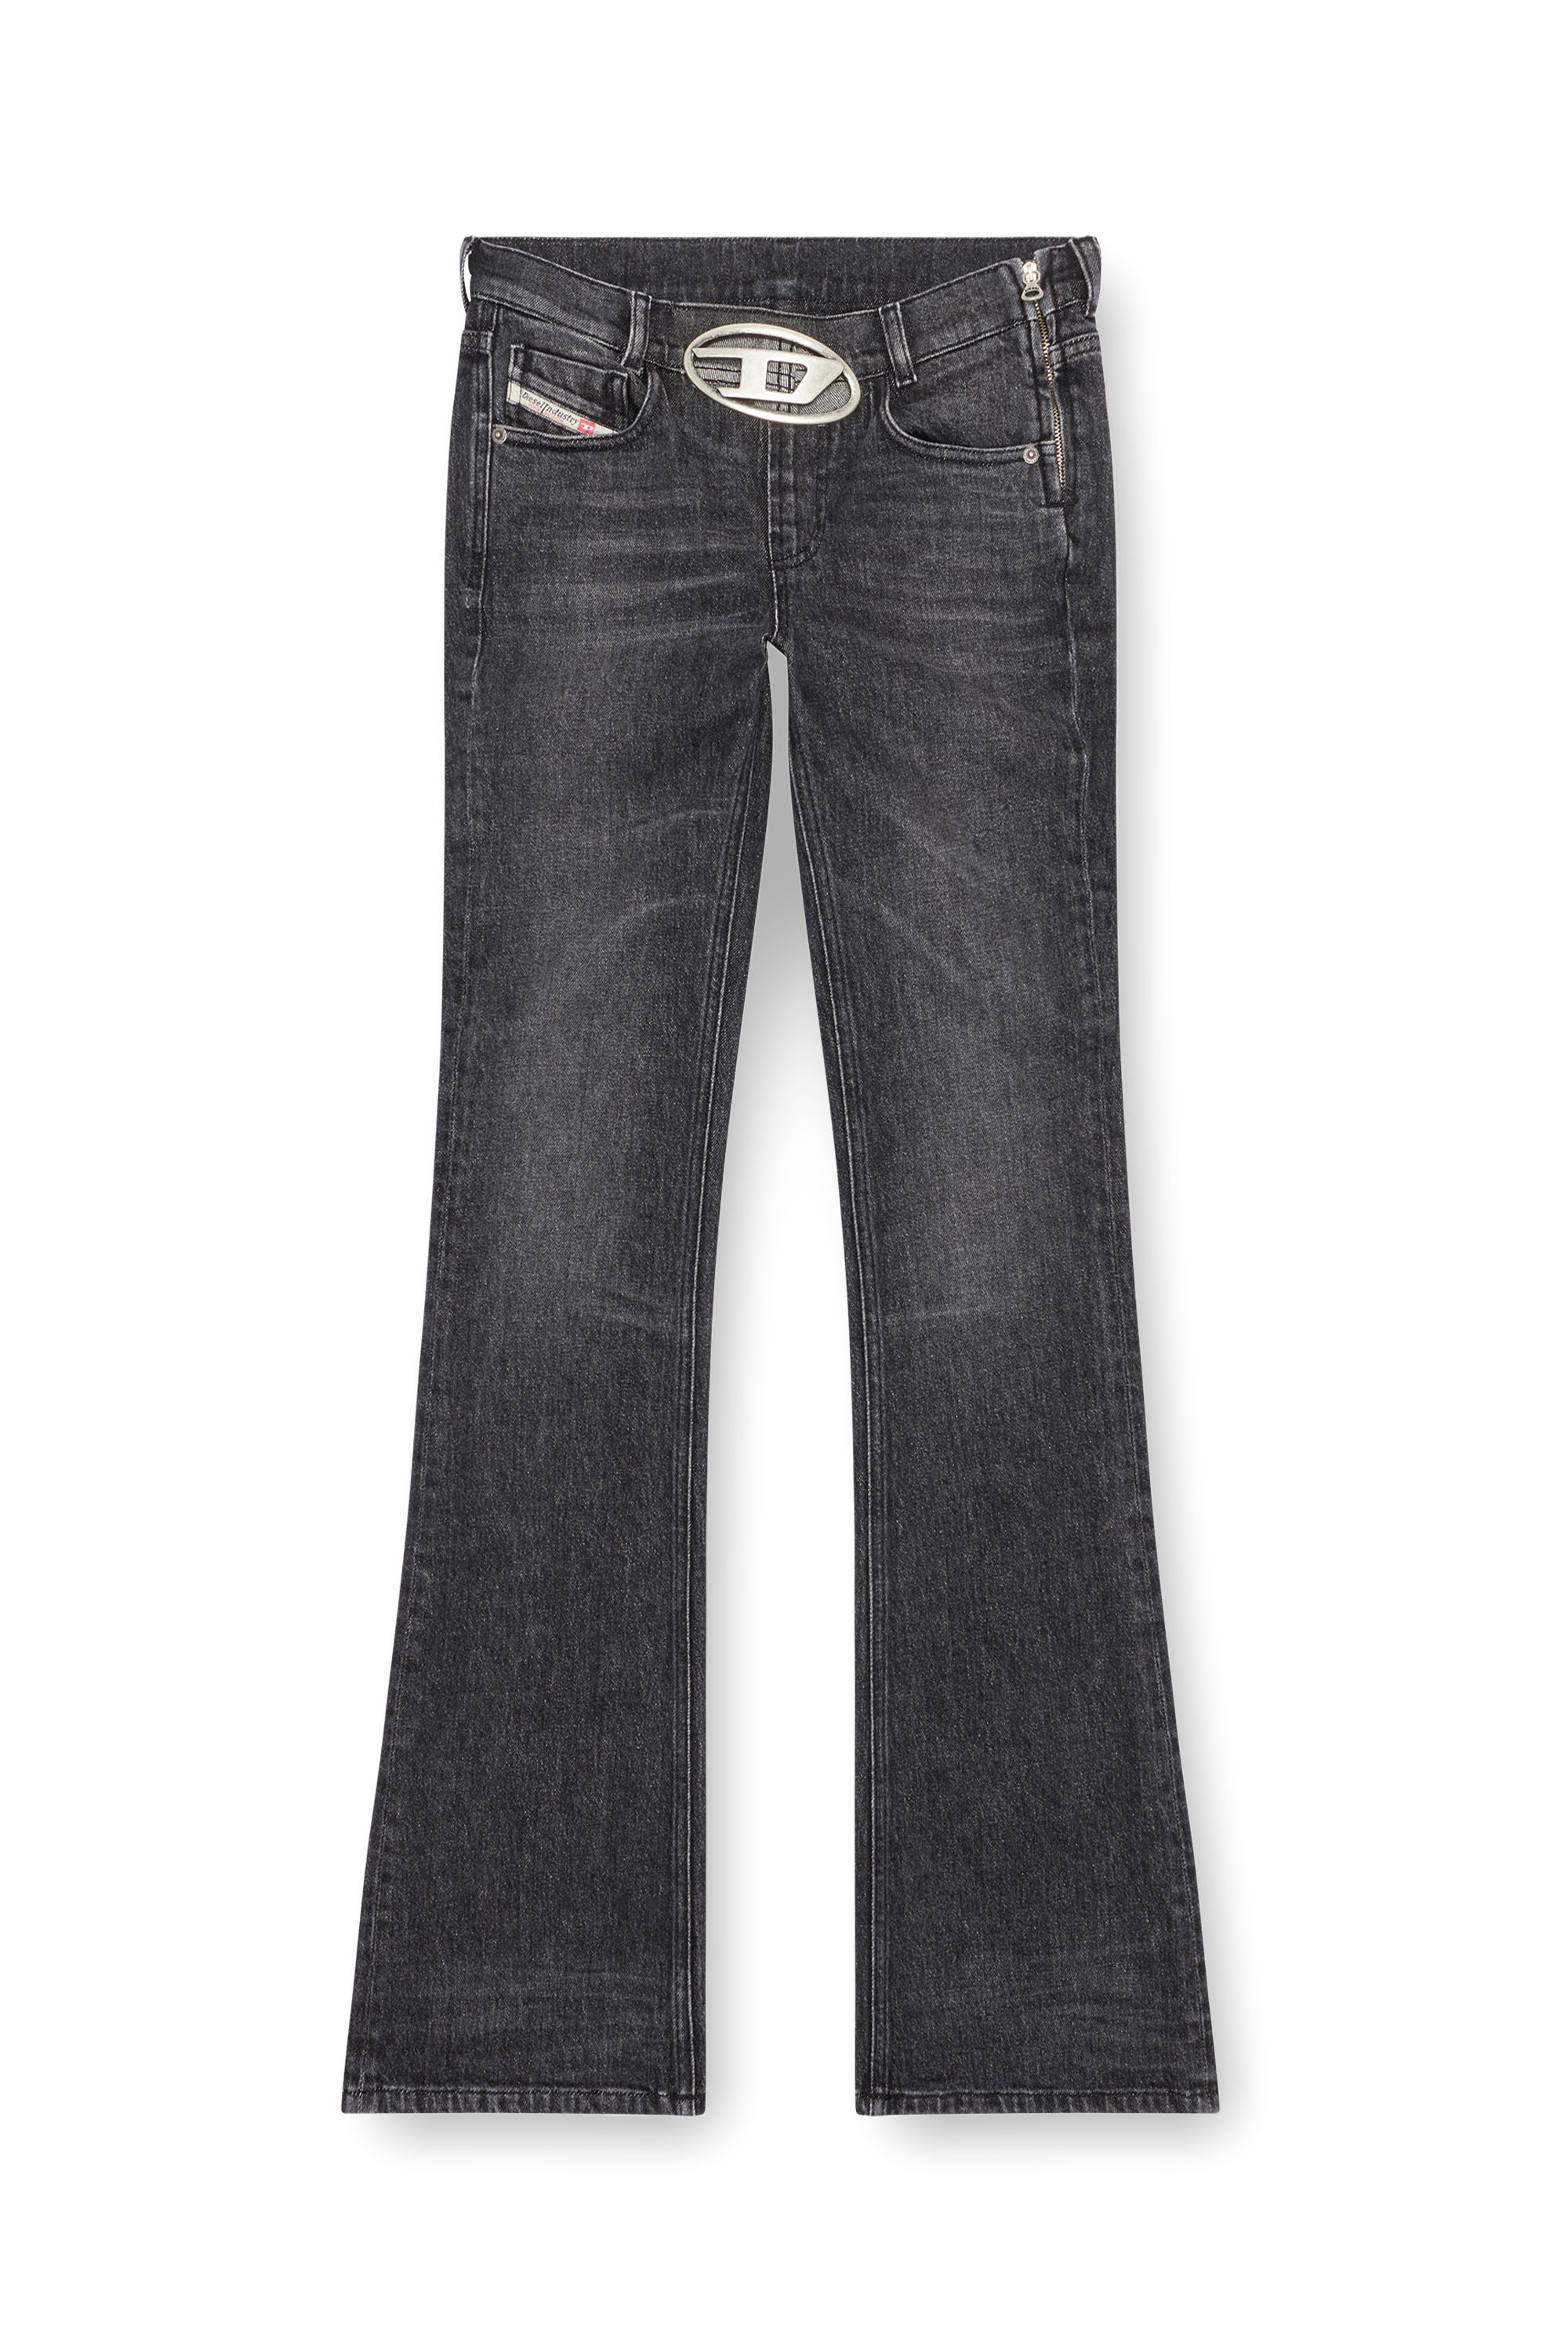 Diesel - Bootcut and Flare Jeans 1969 D-Ebbey 0CKAH, Mujer Bootcut y Flare Jeans - 1969 D-Ebbey in Negro - Image 5